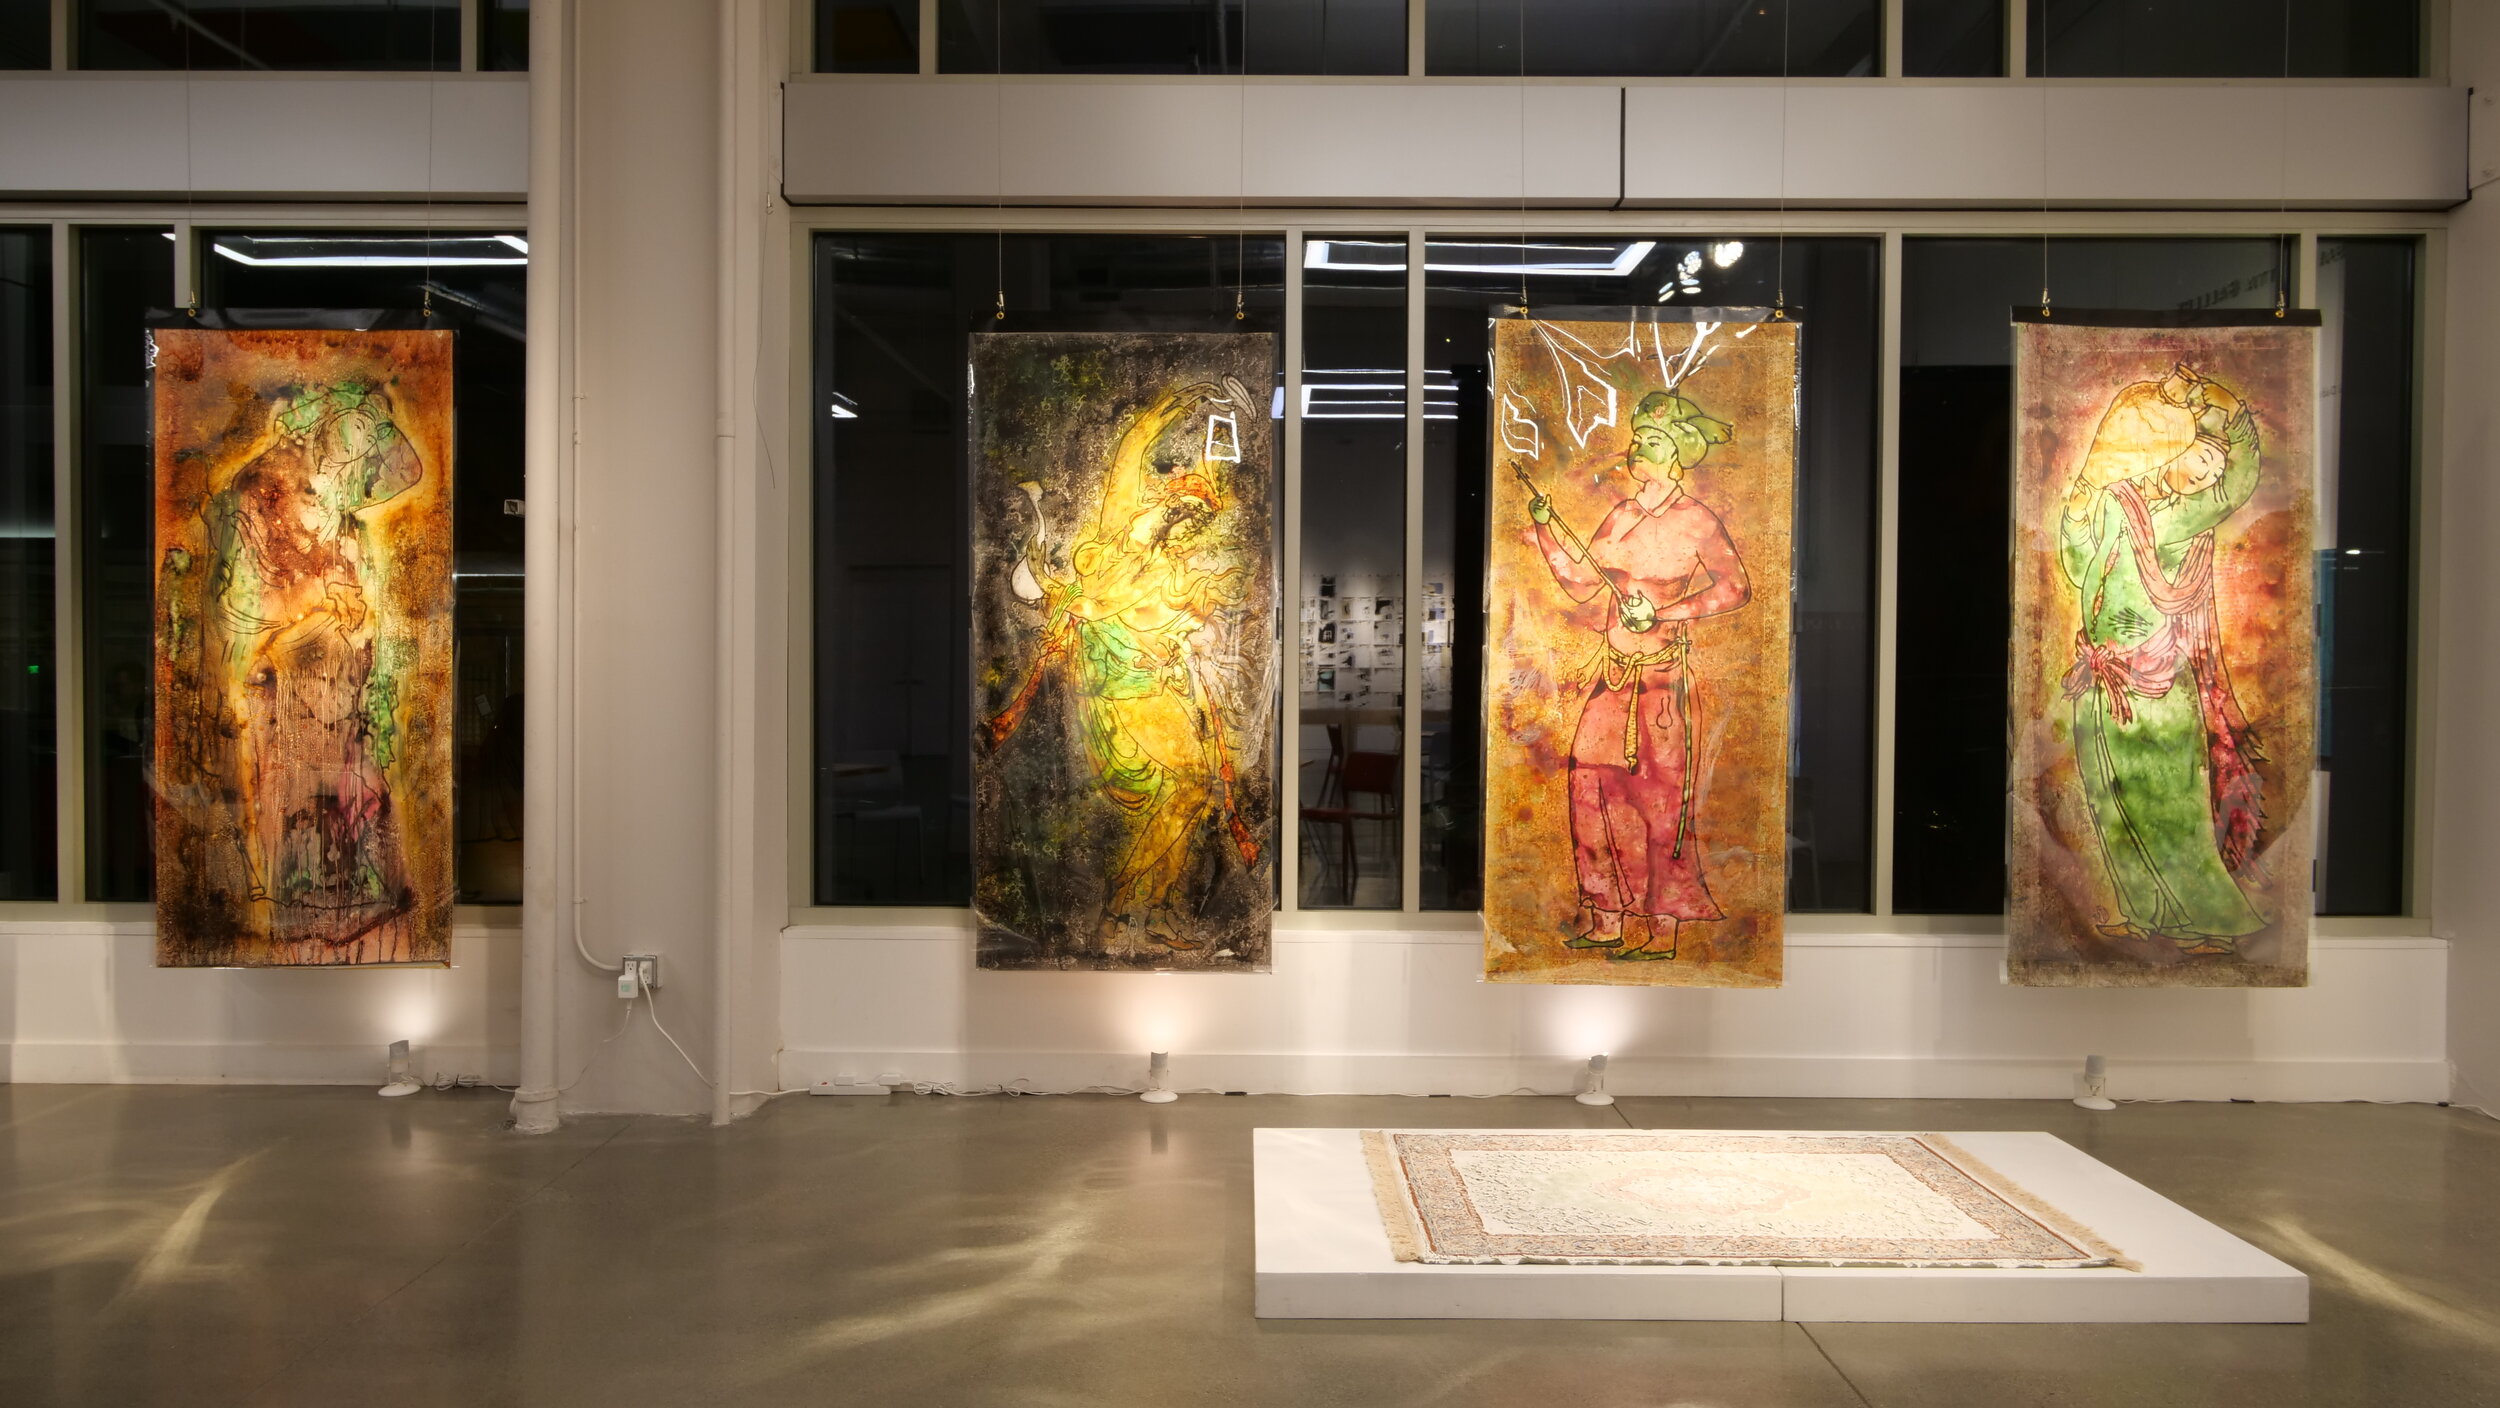 Four large panels of life-size human figures hang in the front windows.  A platform with a rug atop it sits in the foreground.